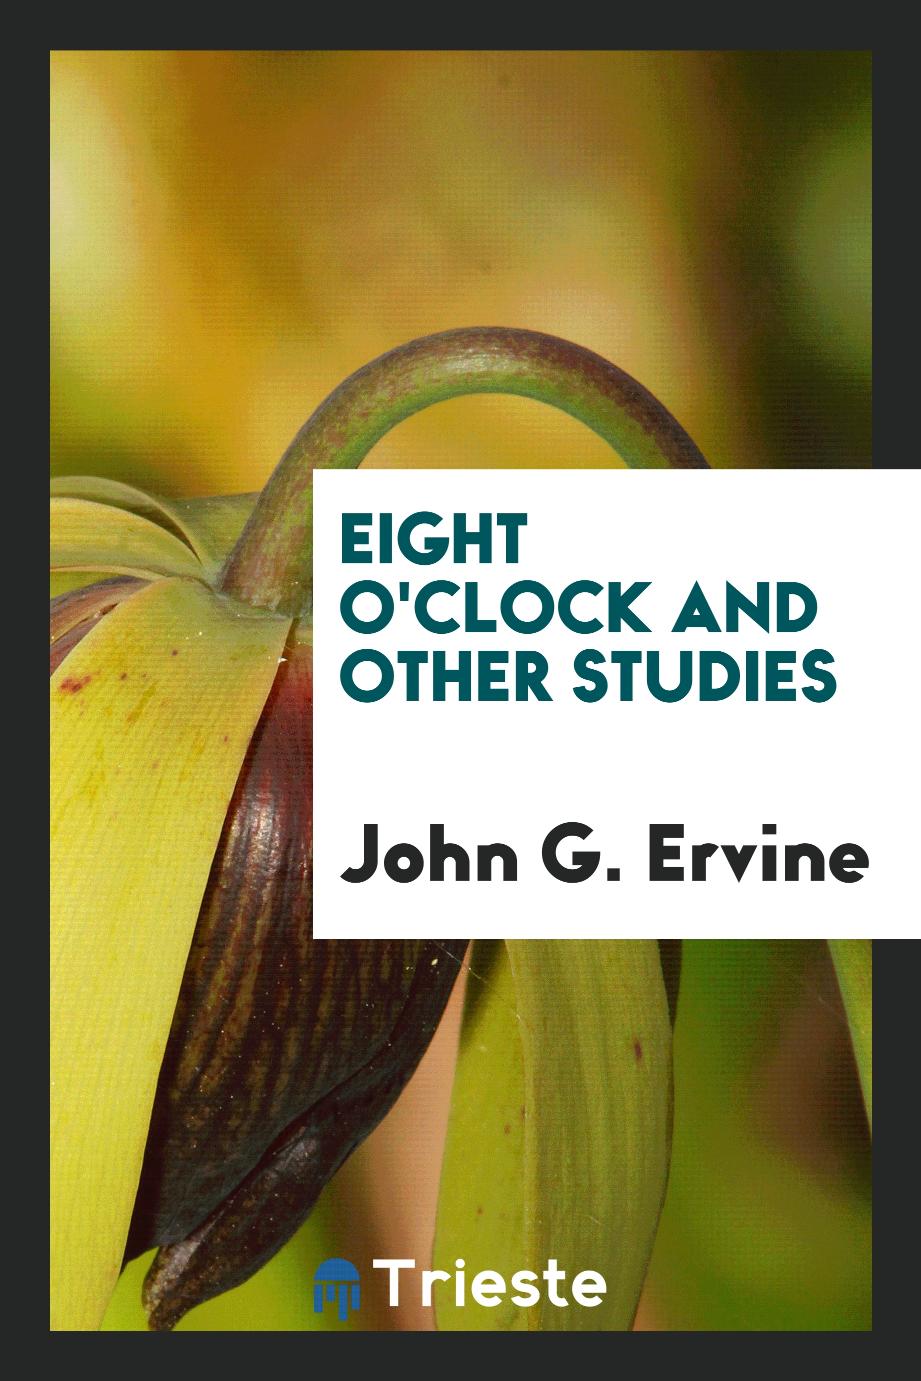 Eight O'clock and Other Studies